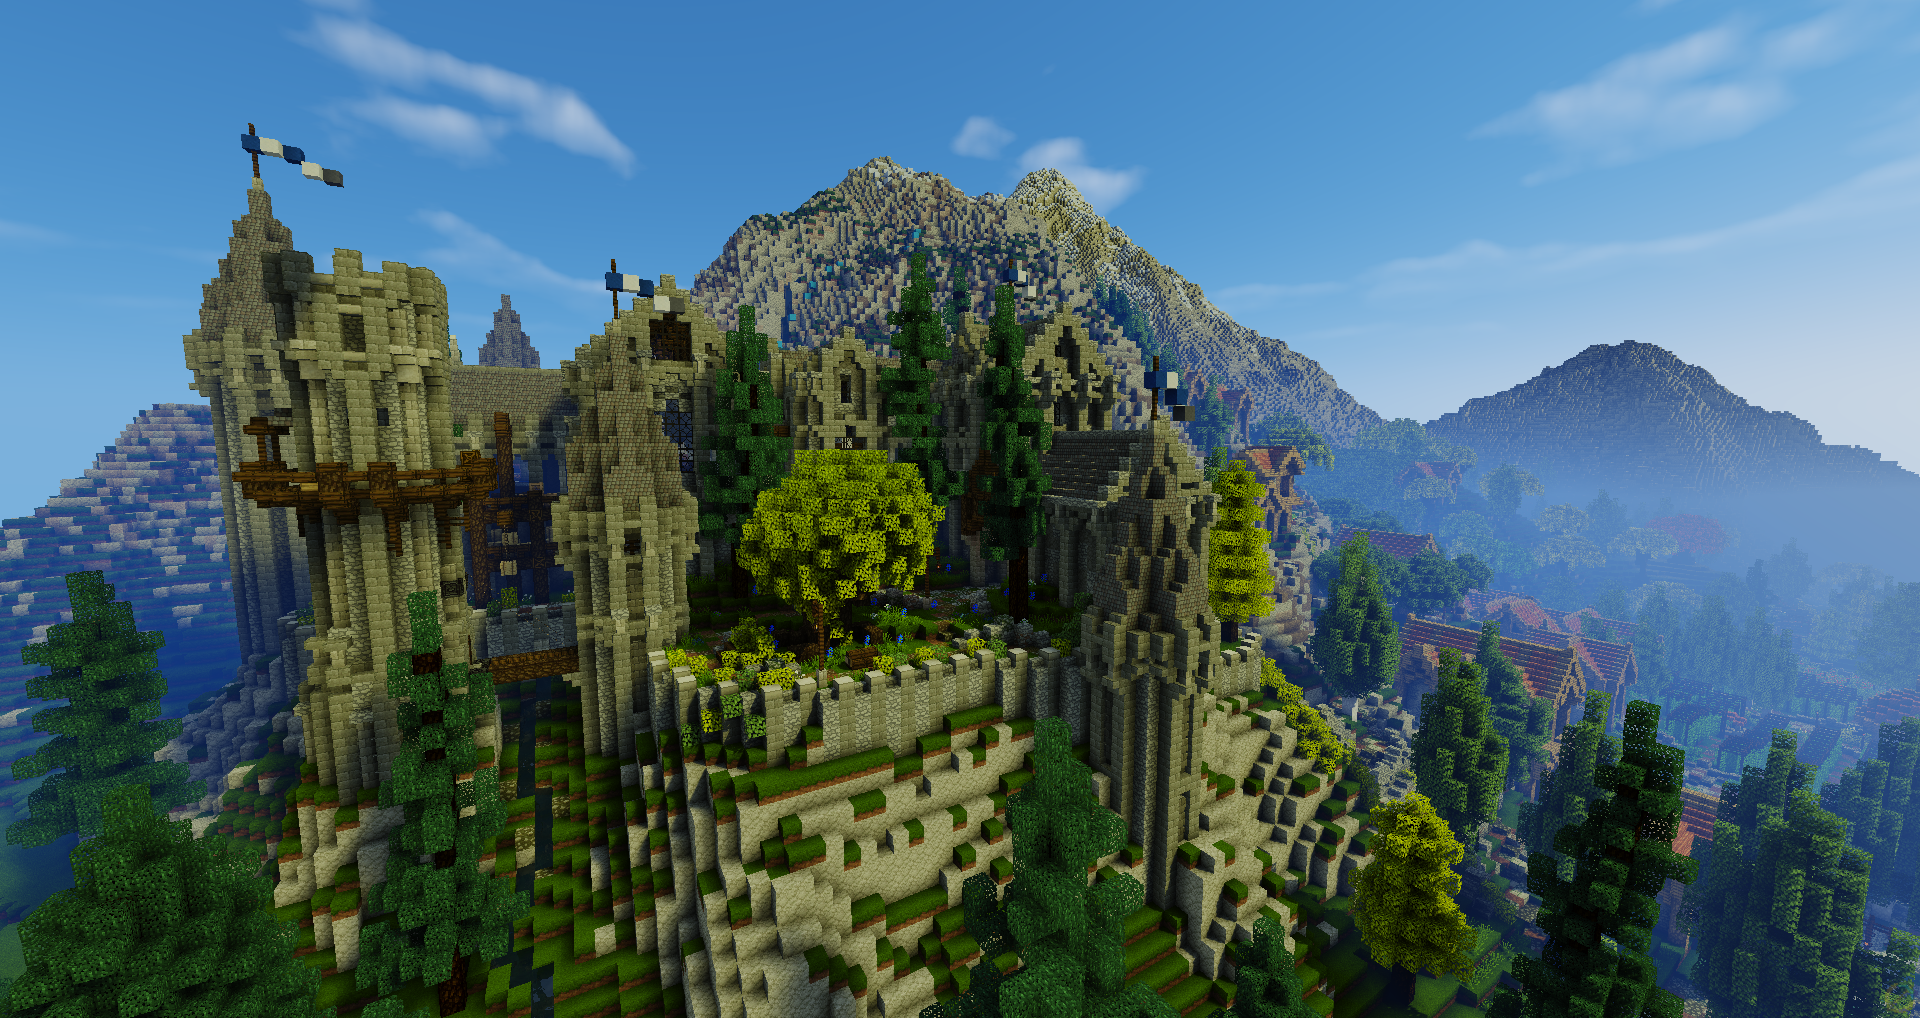 The Lord of the Rings Middle-Earth Looks Incredible in Minecraft with RTX 